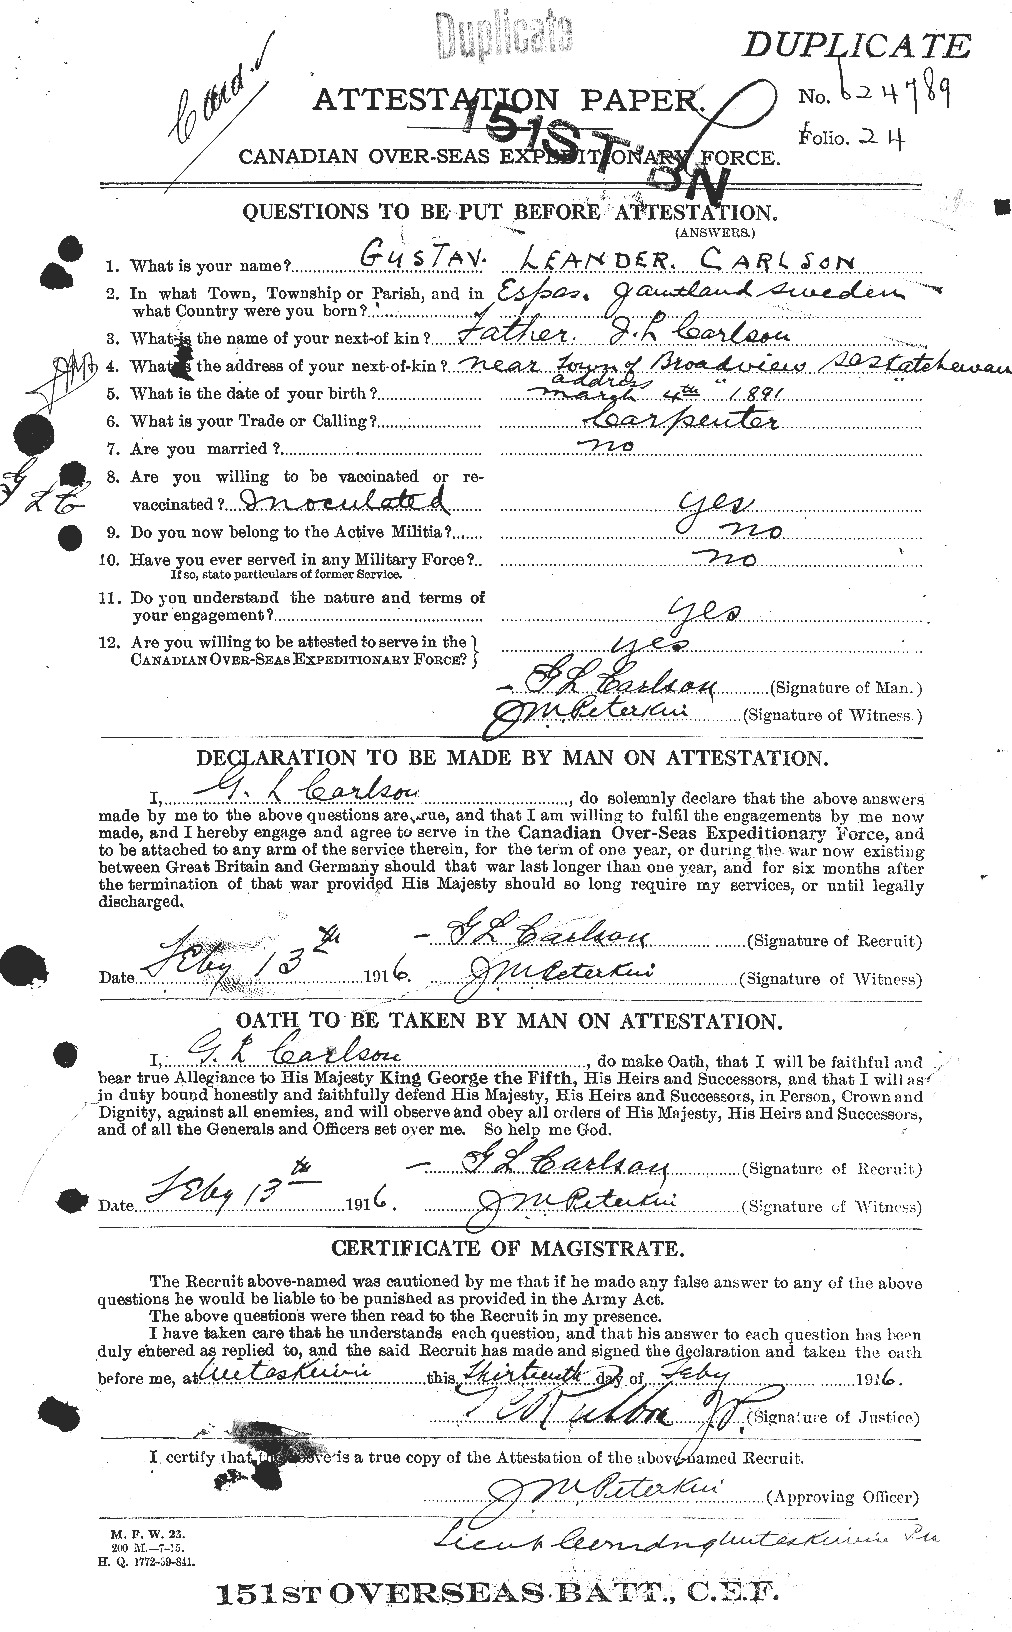 Personnel Records of the First World War - CEF 004552a